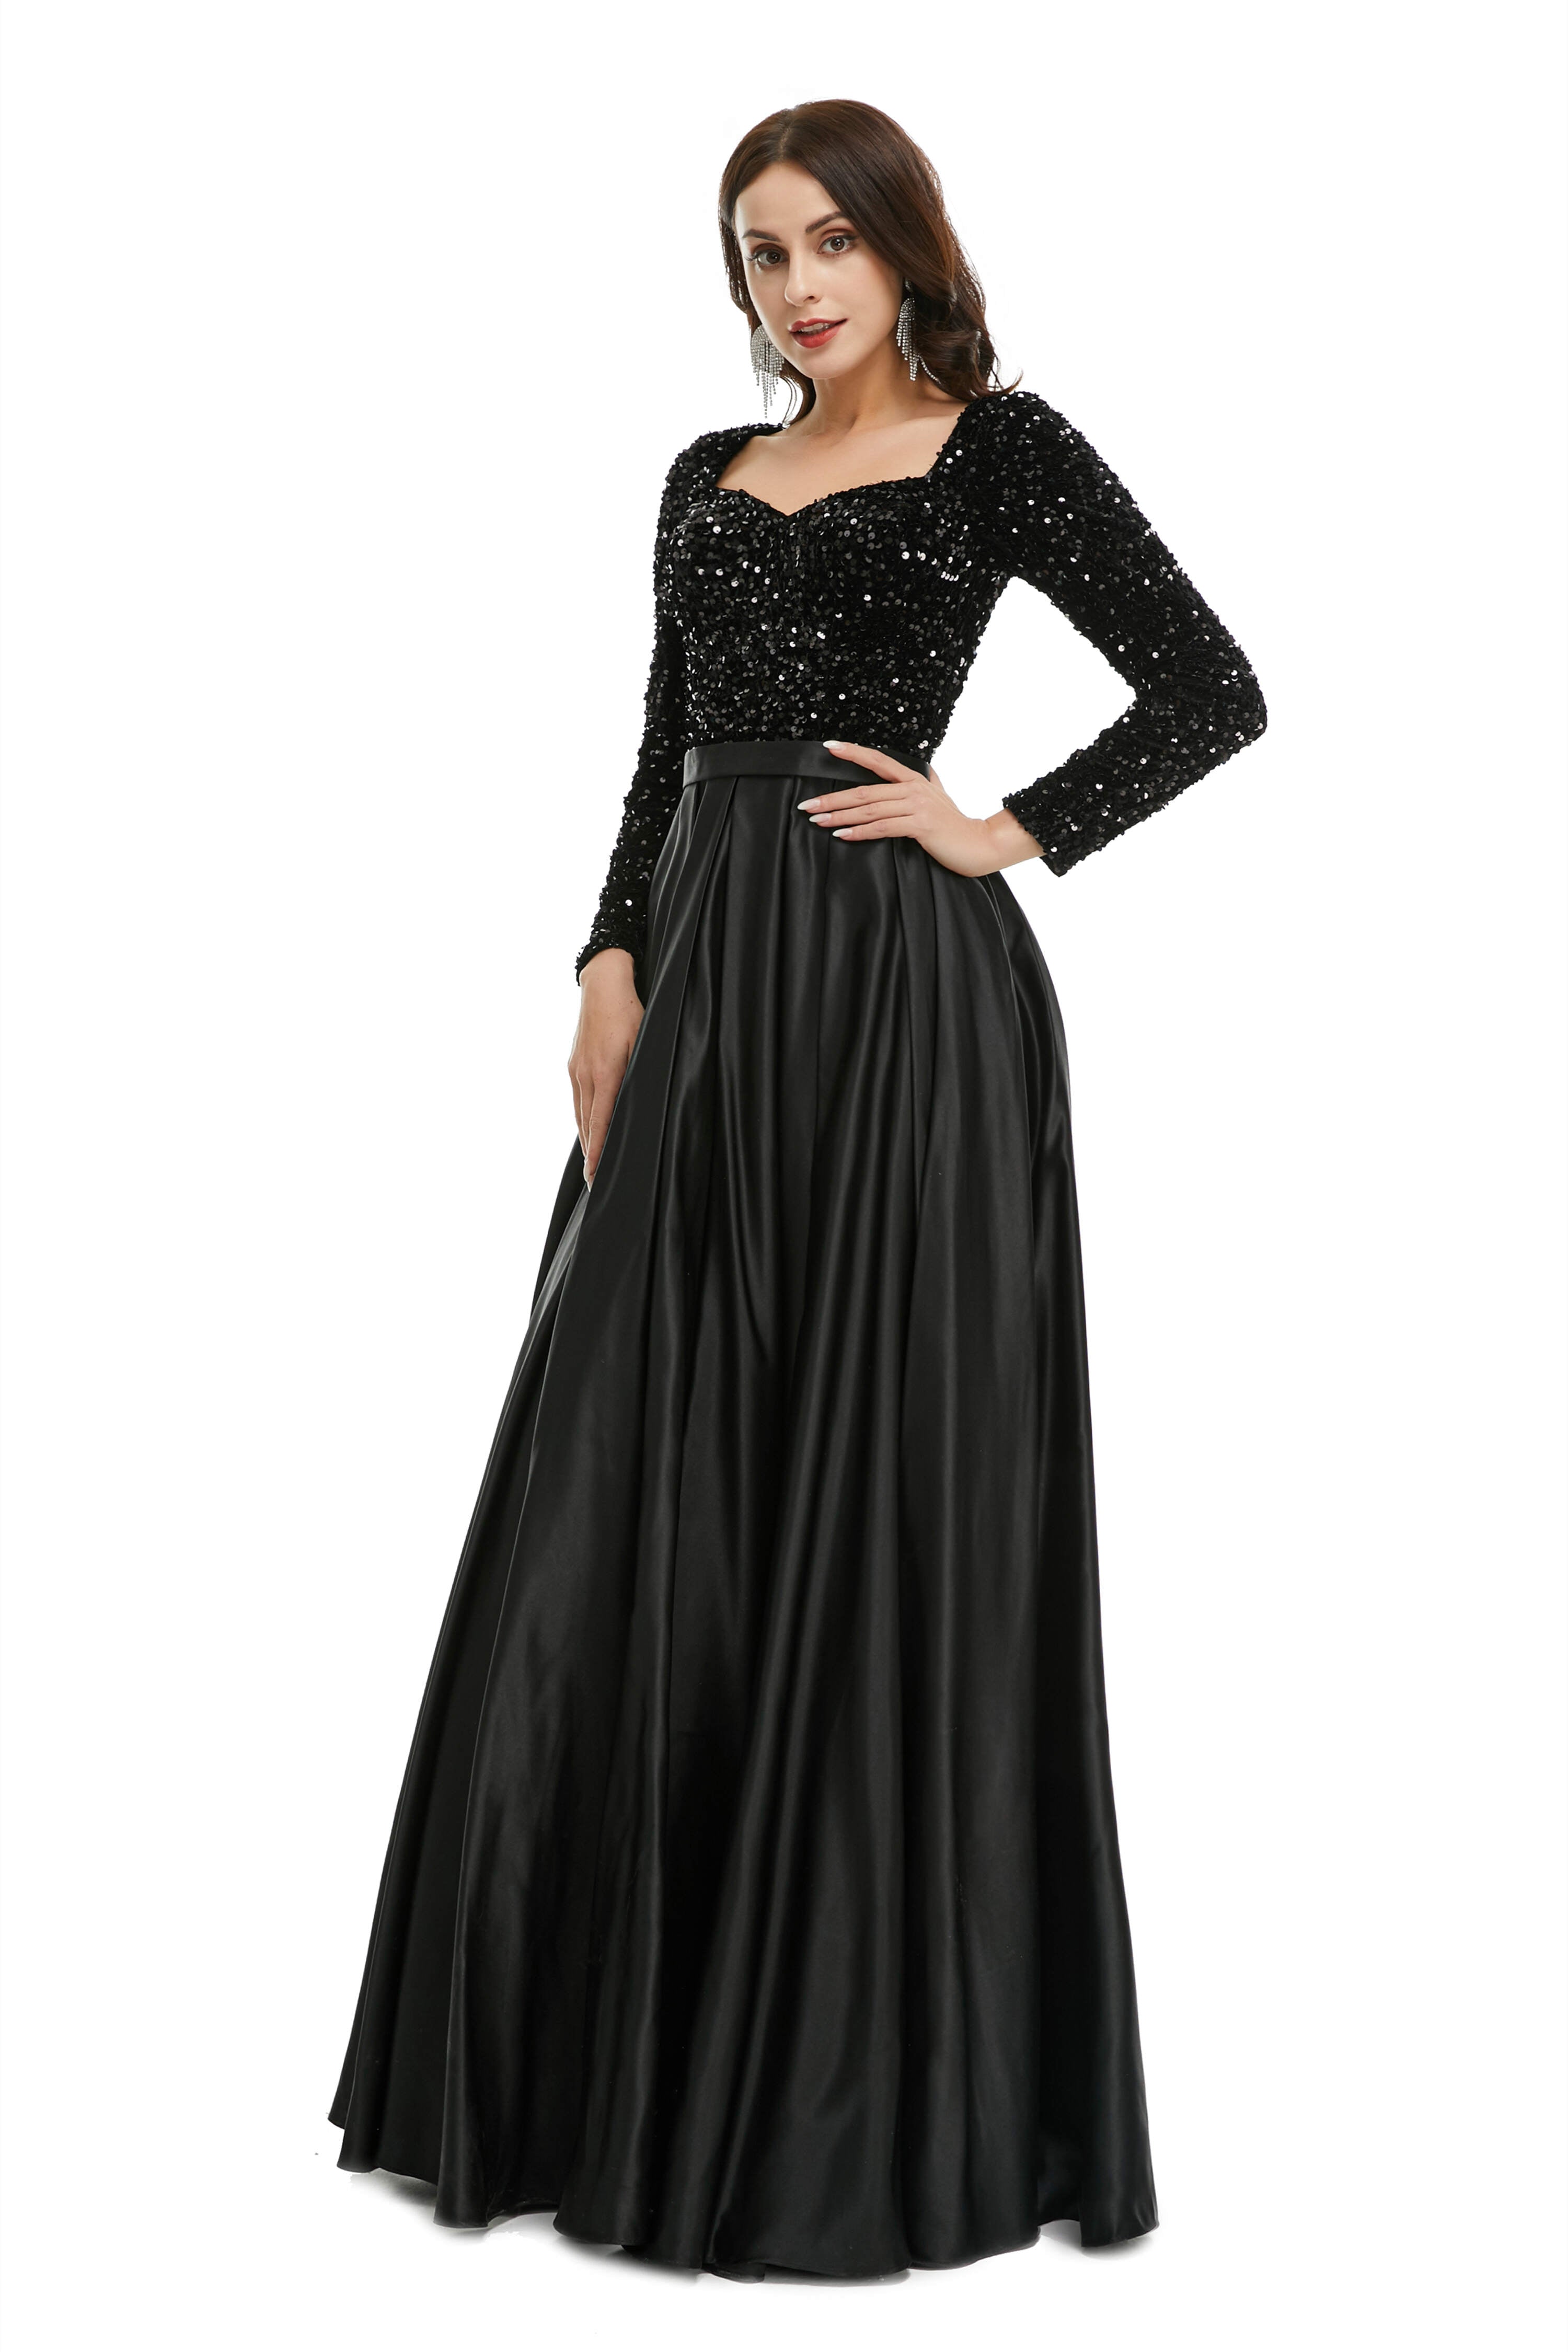 Homecomeing Dresses Short, A-Line Sequins Sweet Neck Long Sleeve Prom Dresses